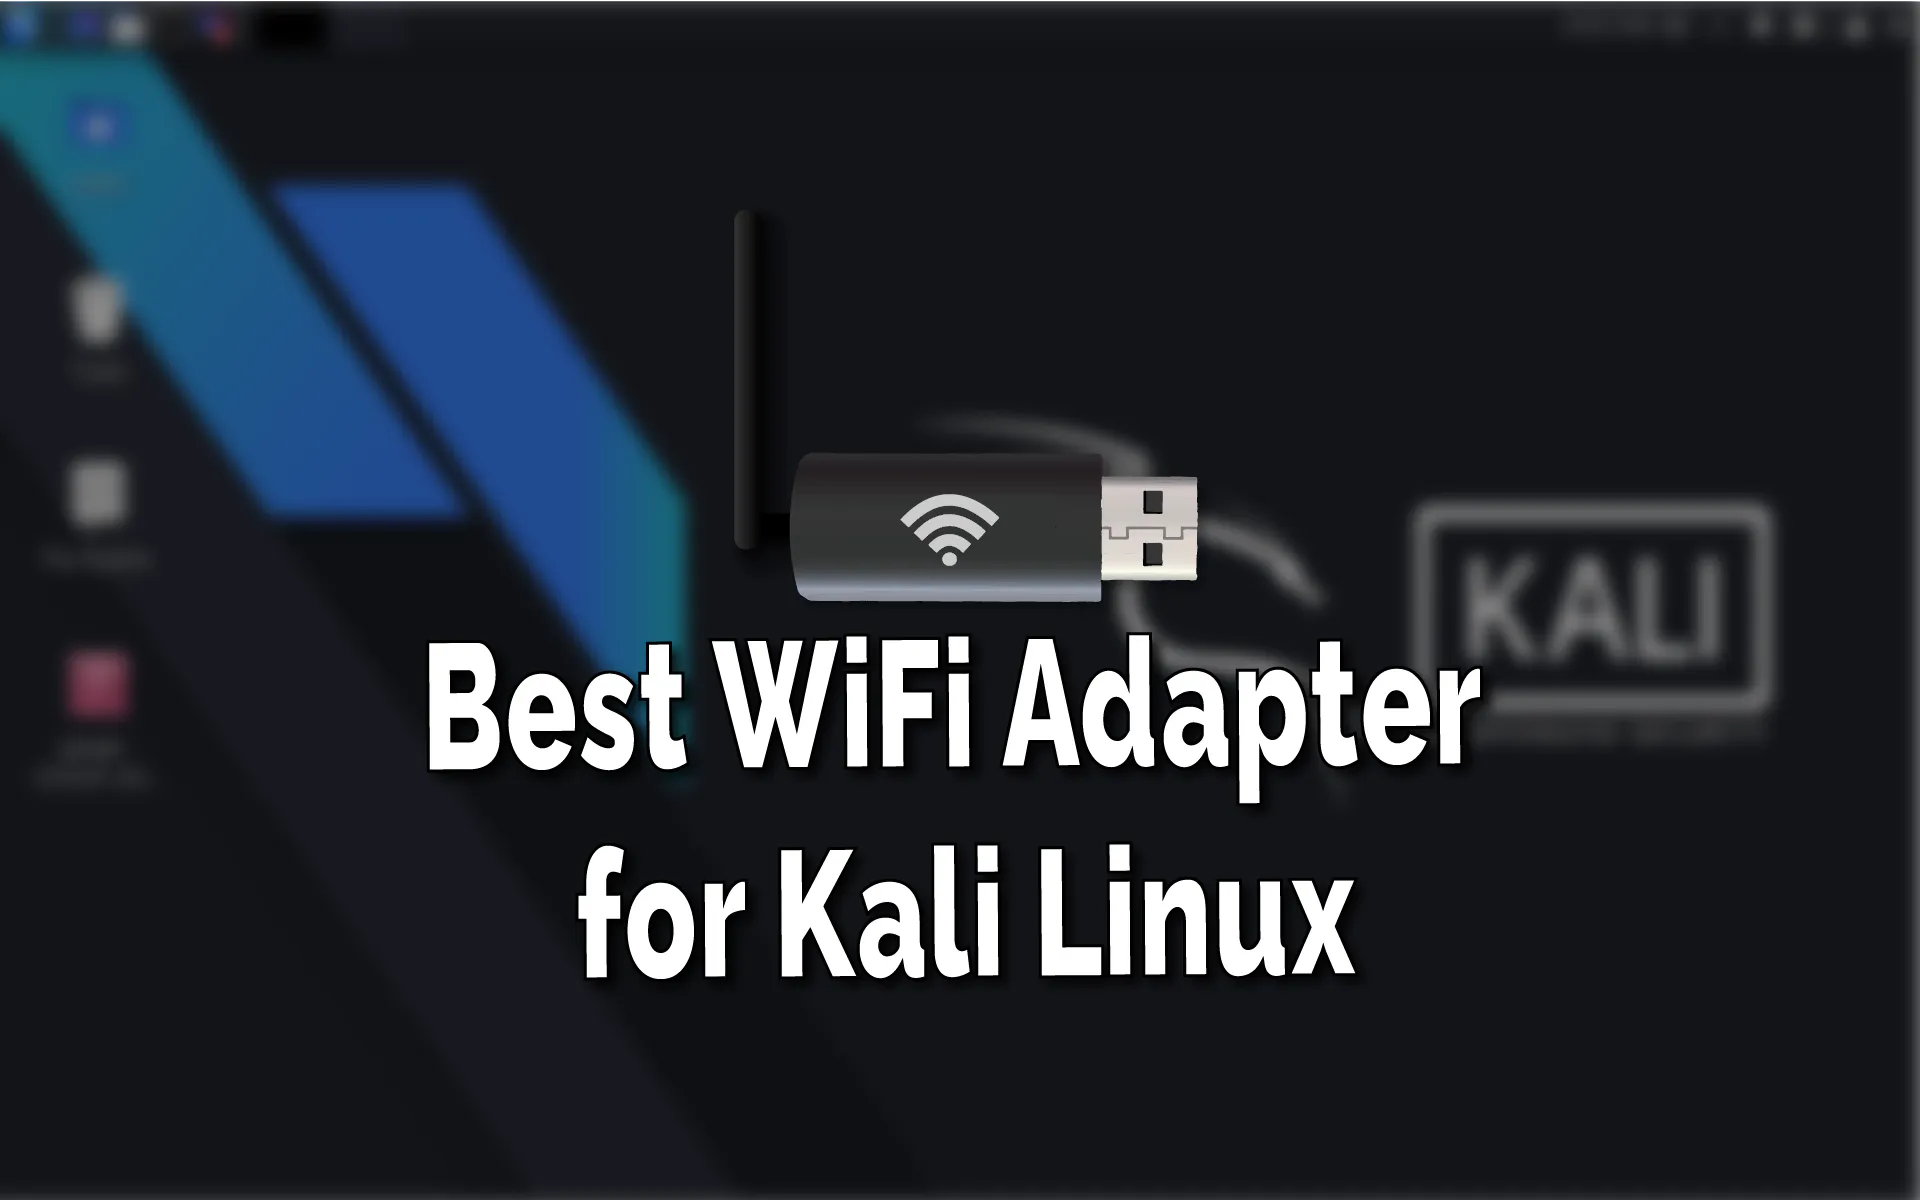 Dualband WiFi Sniffer 802.11 Packet Injection for Kali Linux Based on rt5572 Alternative to Airpcap 